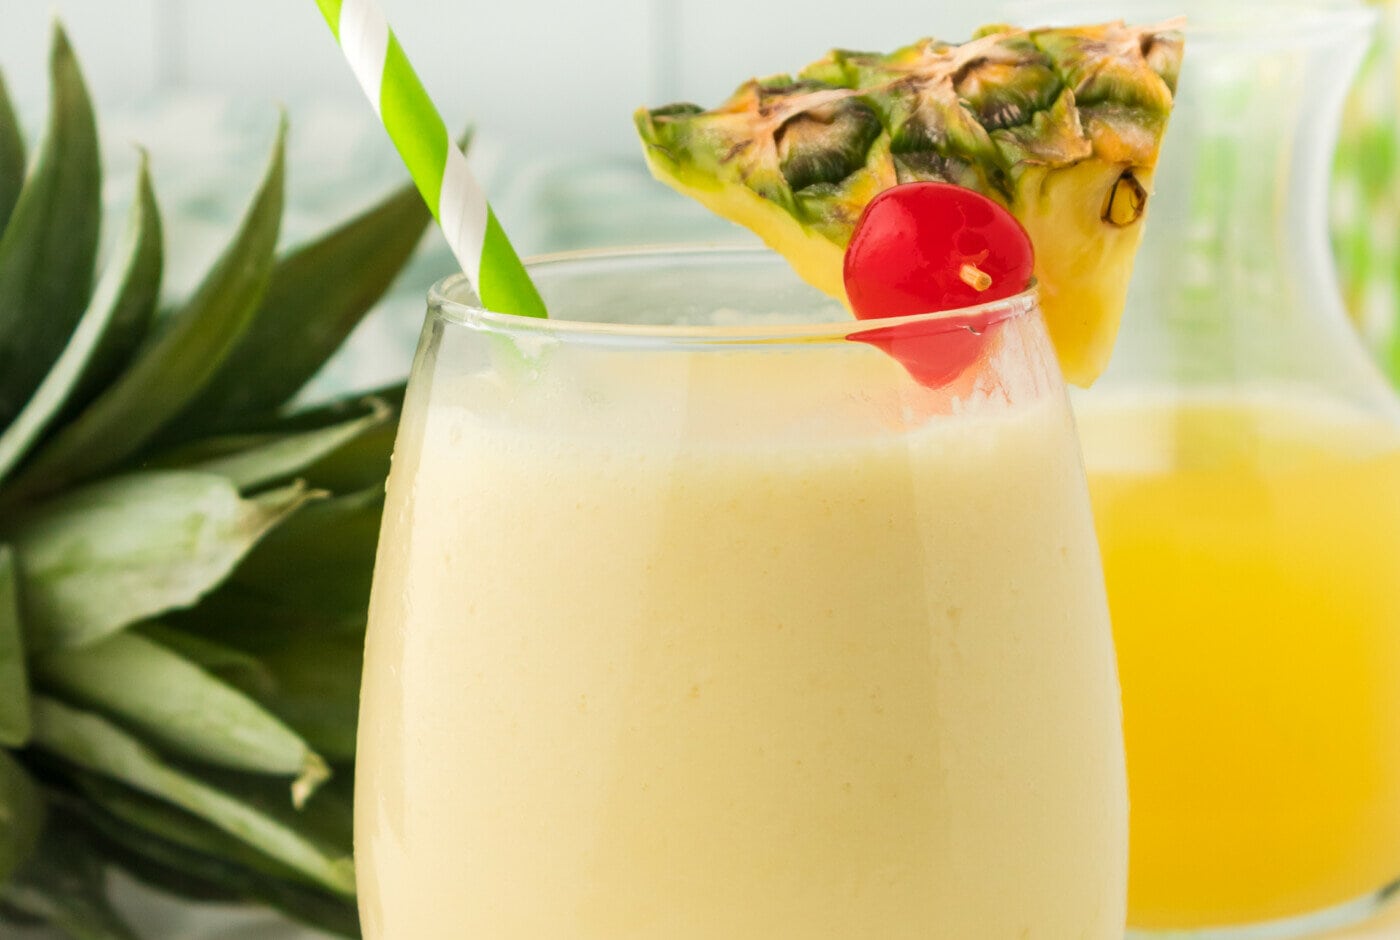 Pineapple Smoothie in a glass.